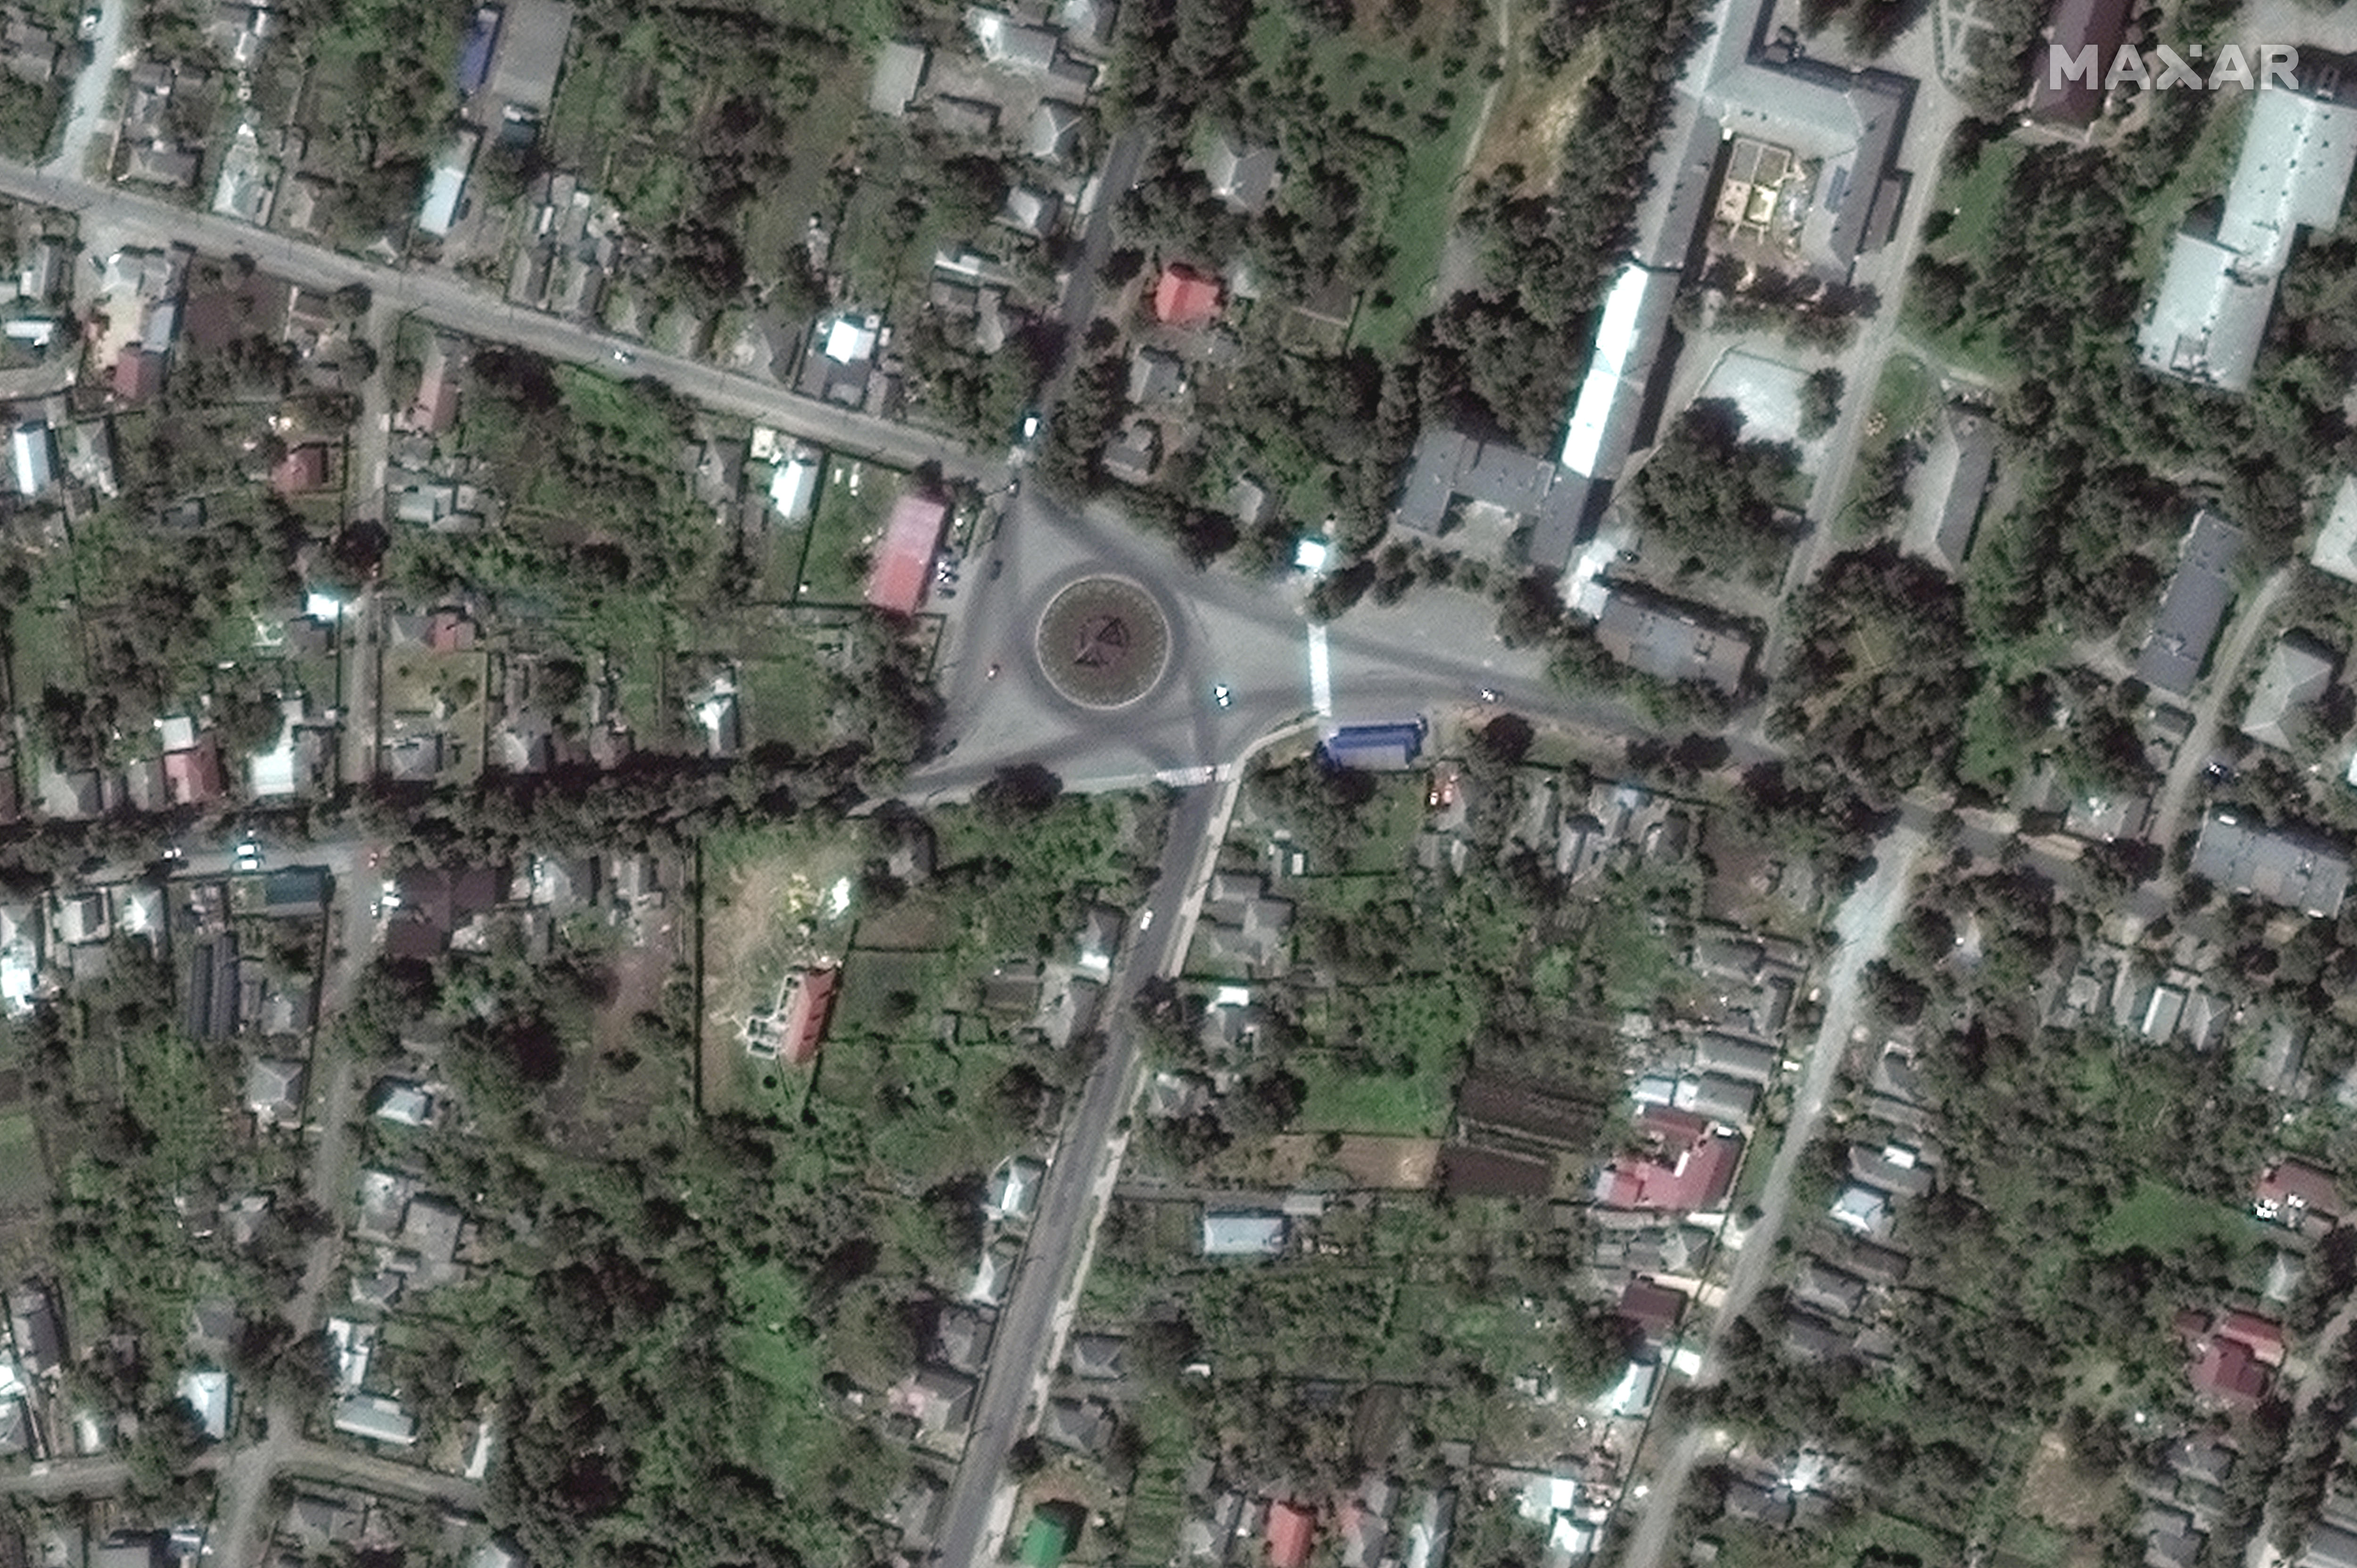 Satellite image of a residential area.